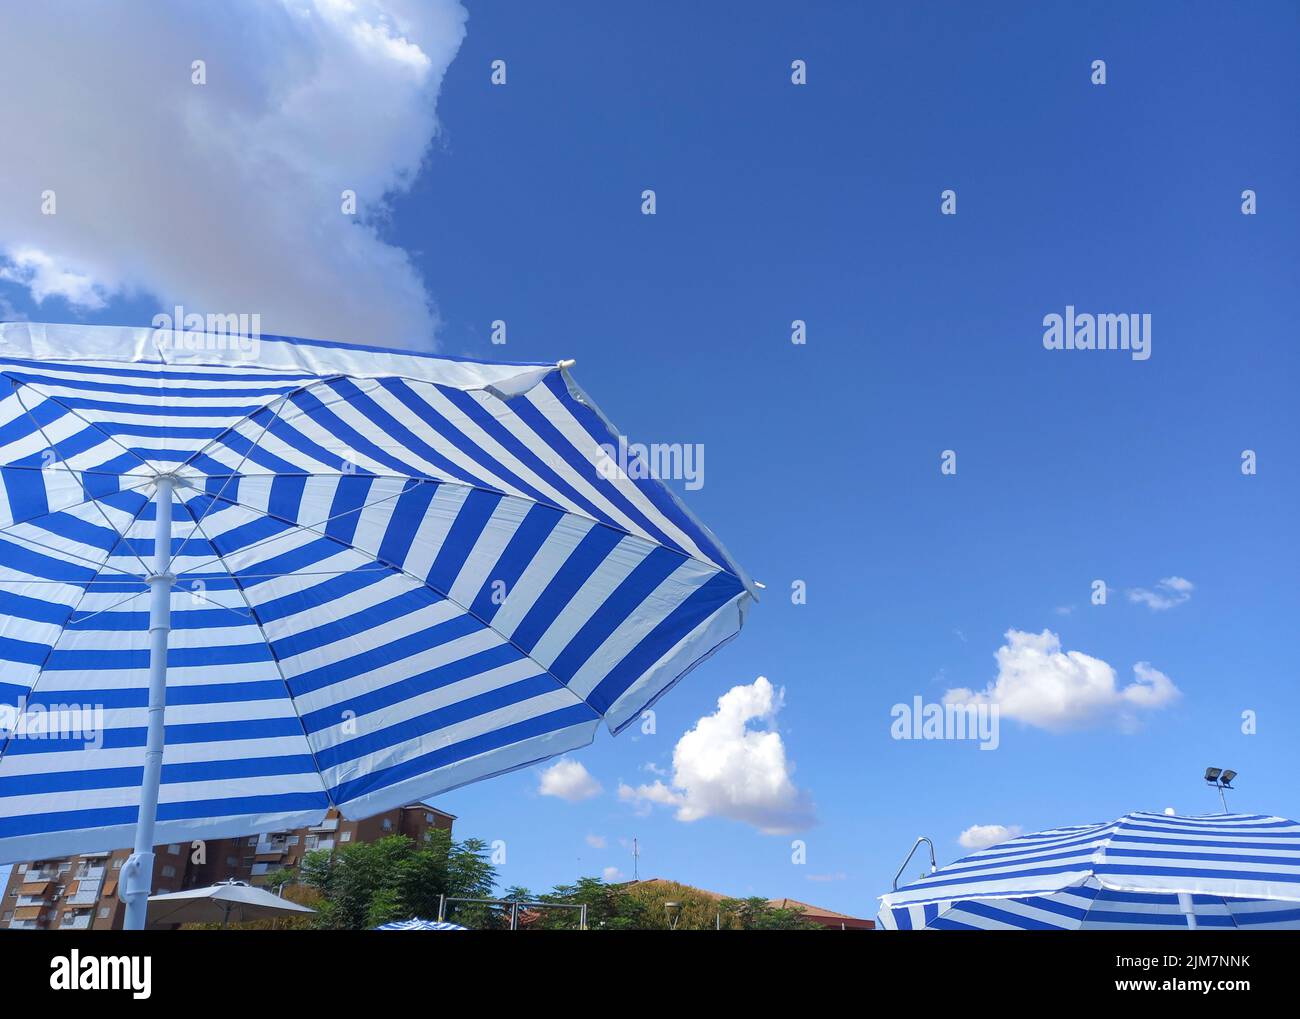 Blue striped umbrellas over blue sky with apartment building. Urban swimning pool background Stock Photo